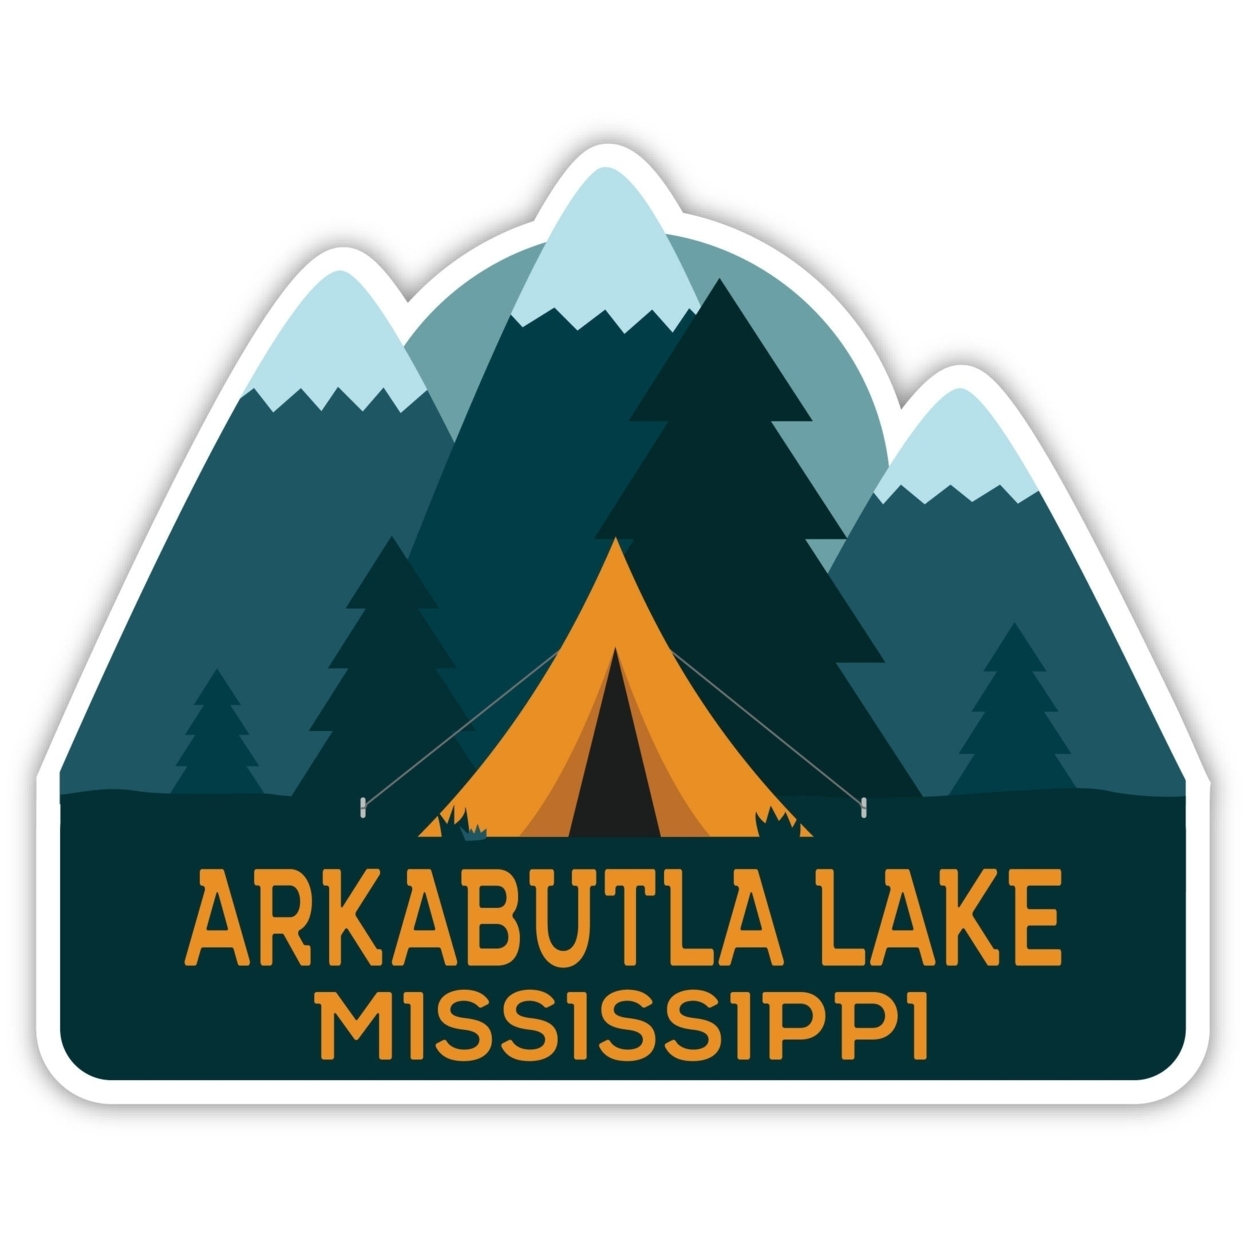 Arkabutla Lake Mississippi Souvenir Decorative Stickers (Choose Theme And Size) - 4-Pack, 8-Inch, Tent